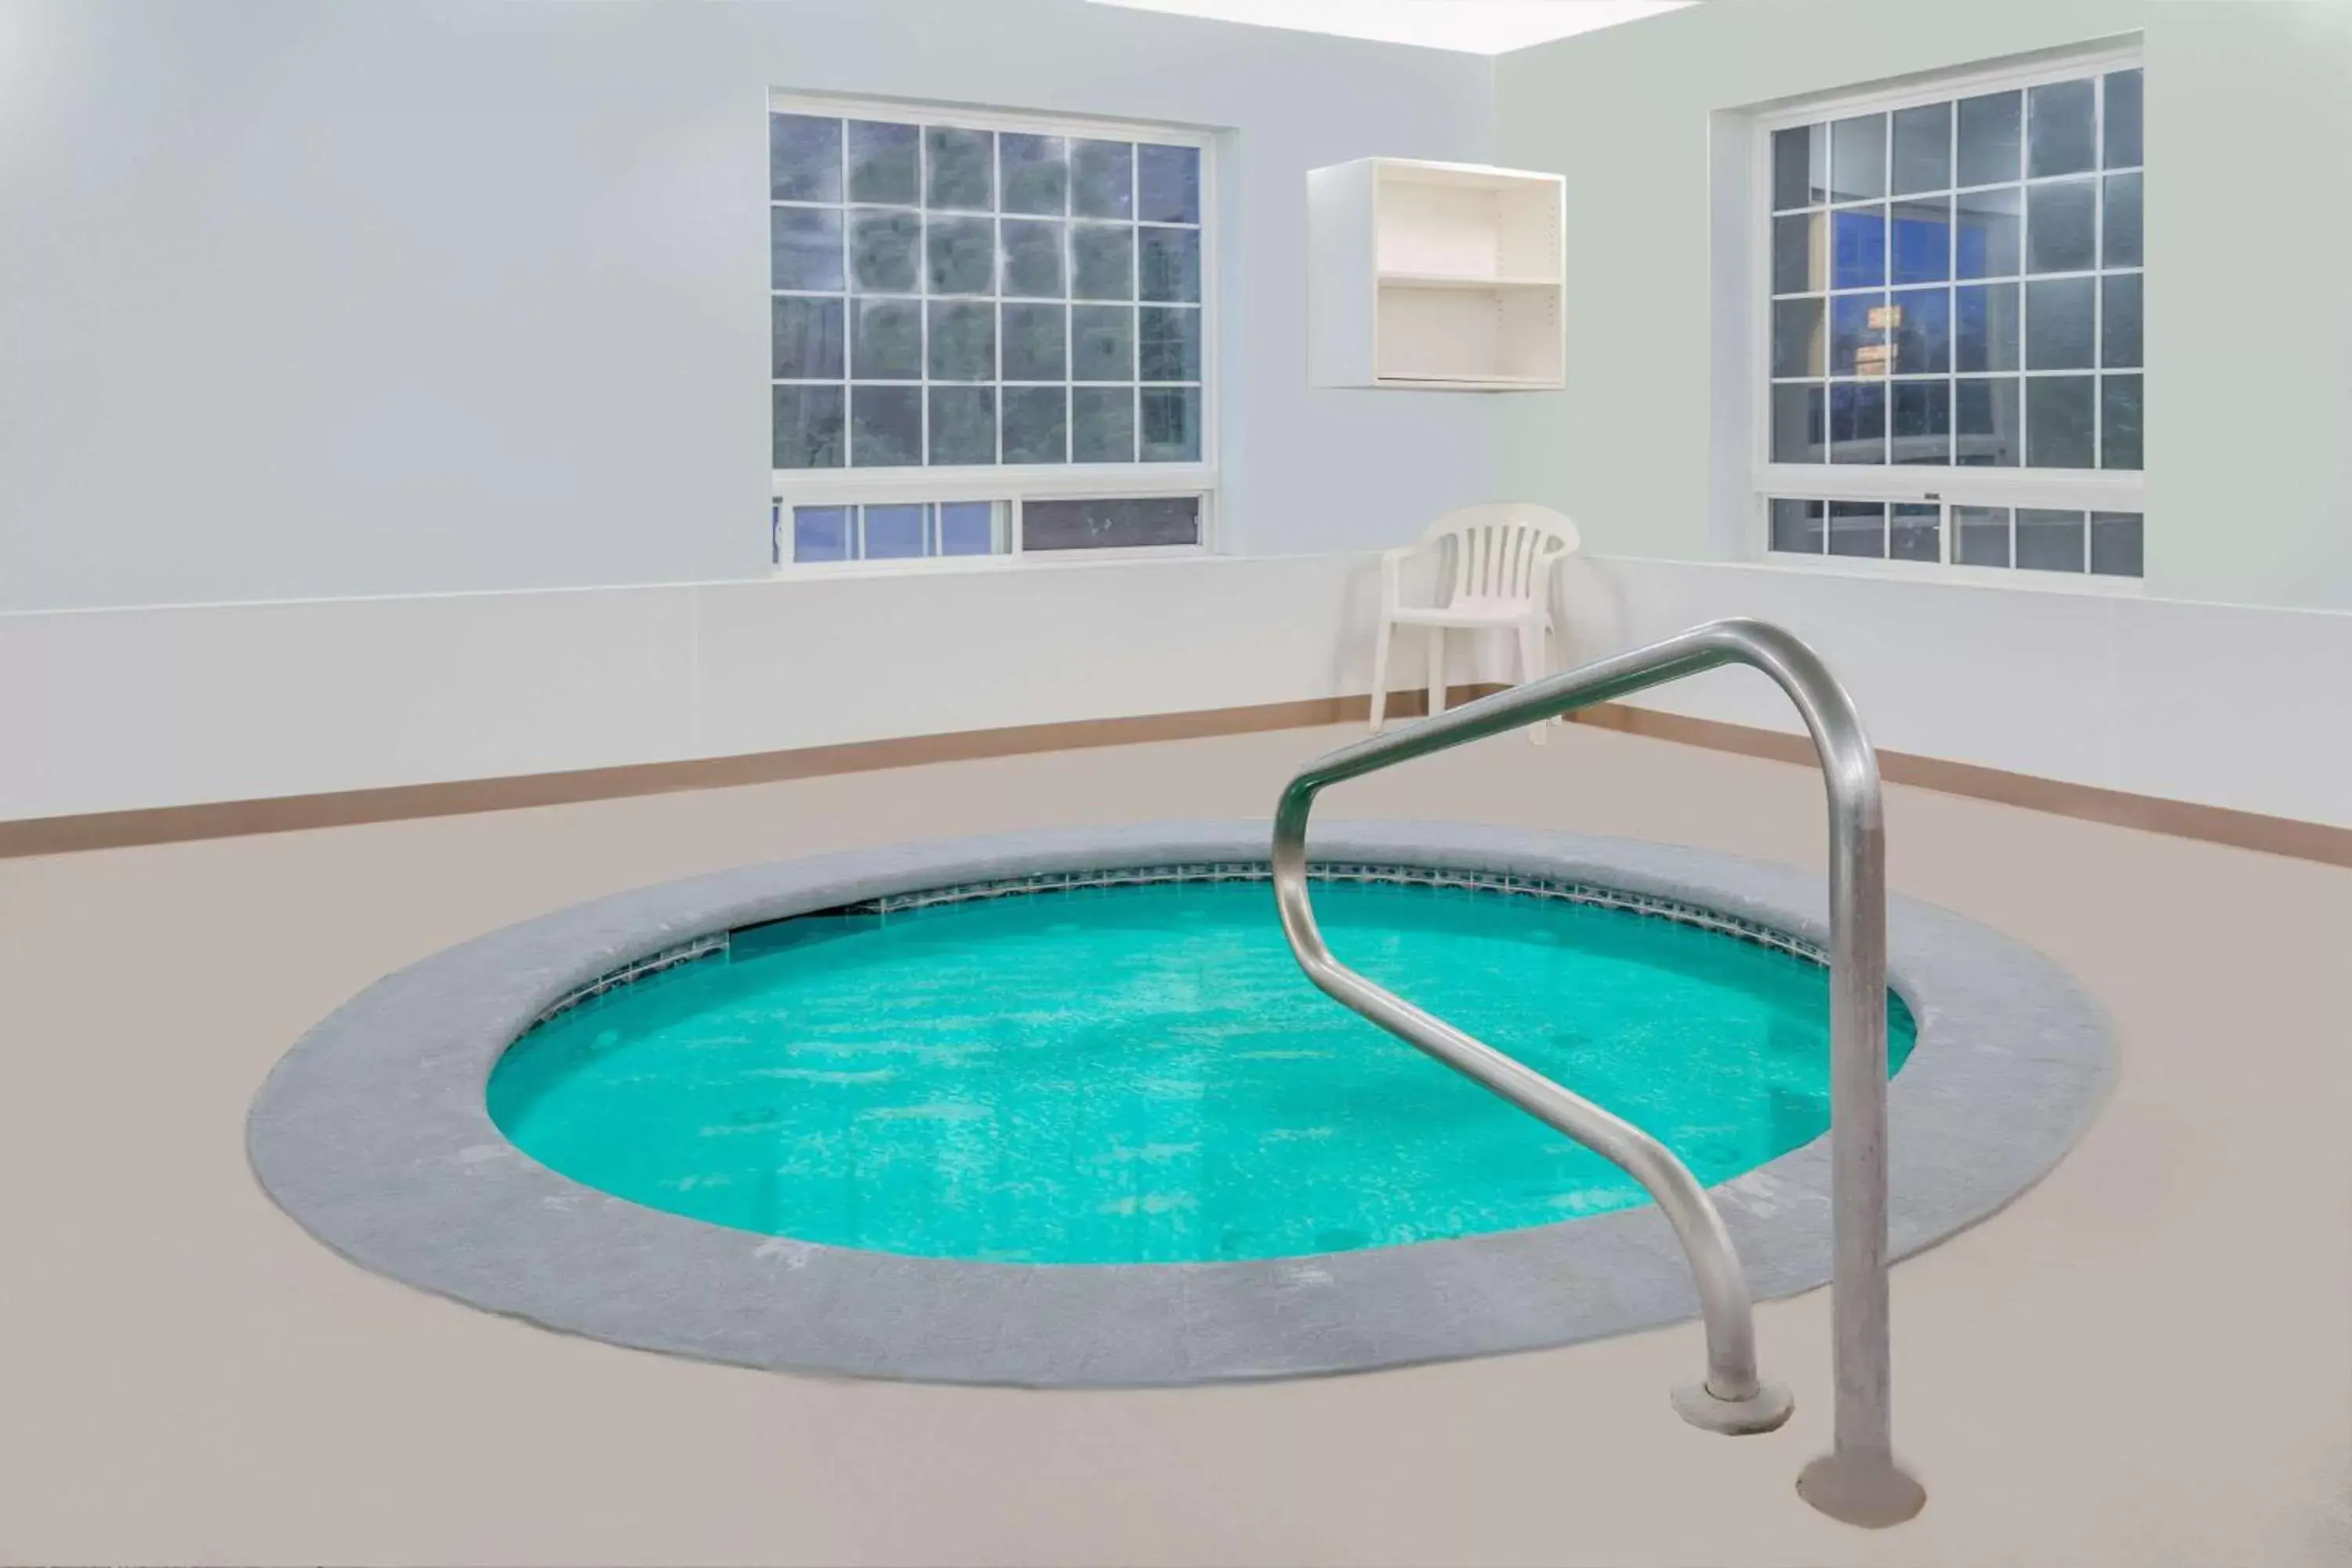 On site, Swimming Pool in Days Inn by Wyndham Ocean Shores